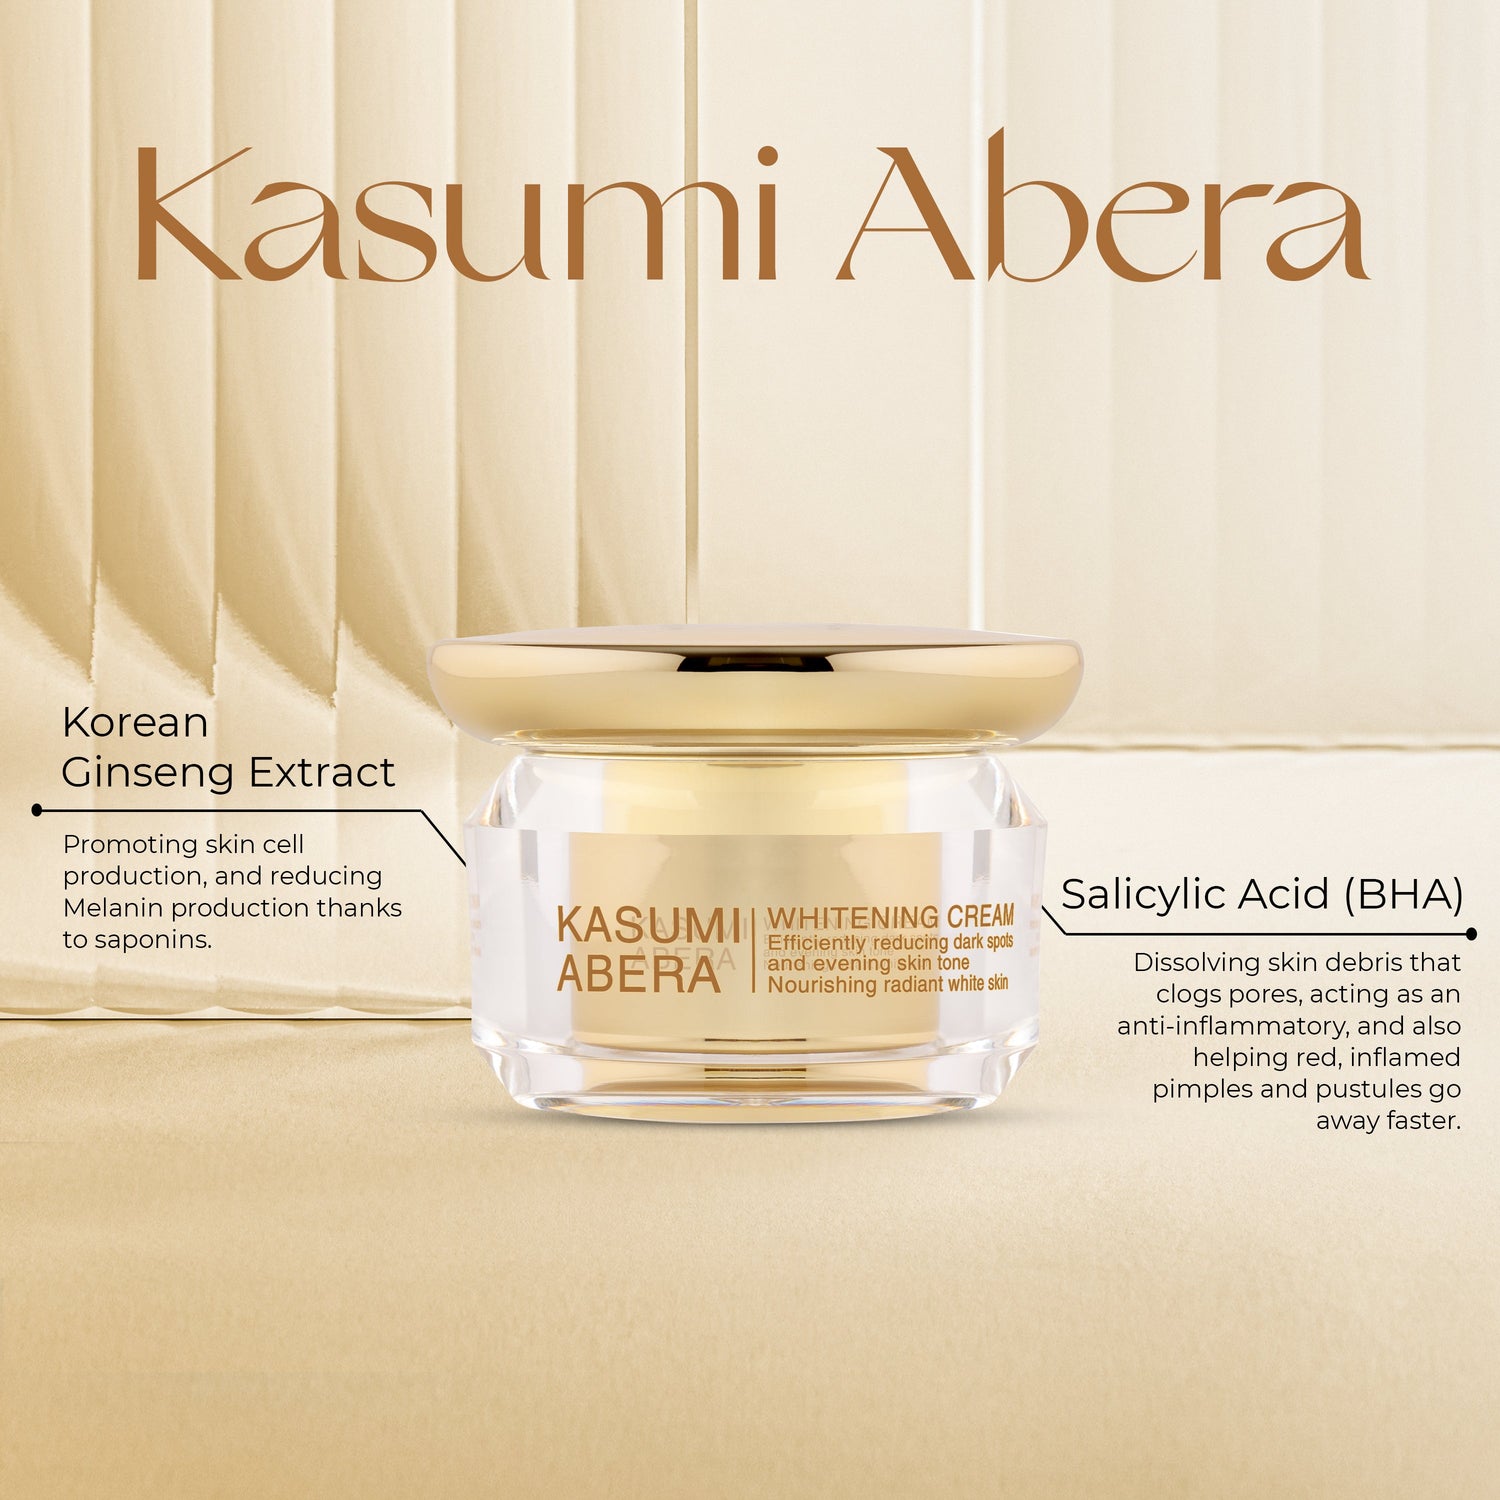 Kasumi Abera Whitening Cream - Anti-aging - Facial Skin Care, Effectively Reducing Dark Spots and Pigments, Extensive Moisturizer